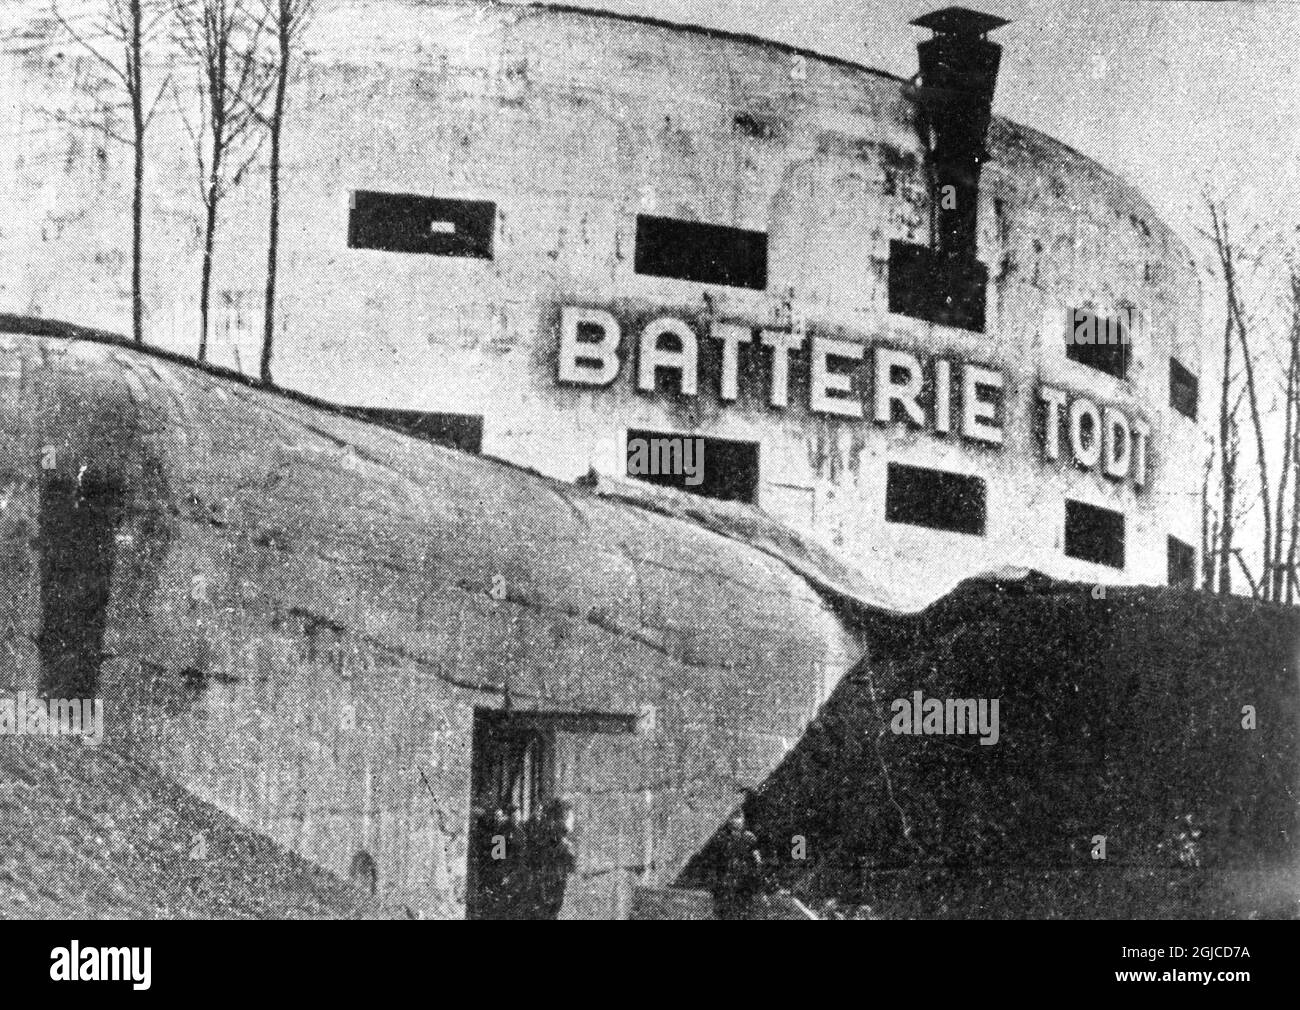 CHANNEL COAST, FRANCE 1940-1944 One of the forts along the French coast of la Manche (English Channel), during the German occupation of parts of France during the Second World War. 'Batterie Todt' refers to Fritz Todt, leader of Organisation Todt, a German construction batttalion 1938-1945. Photo: AB Text & Bilder / SVT / Kod: 5600  Stock Photo